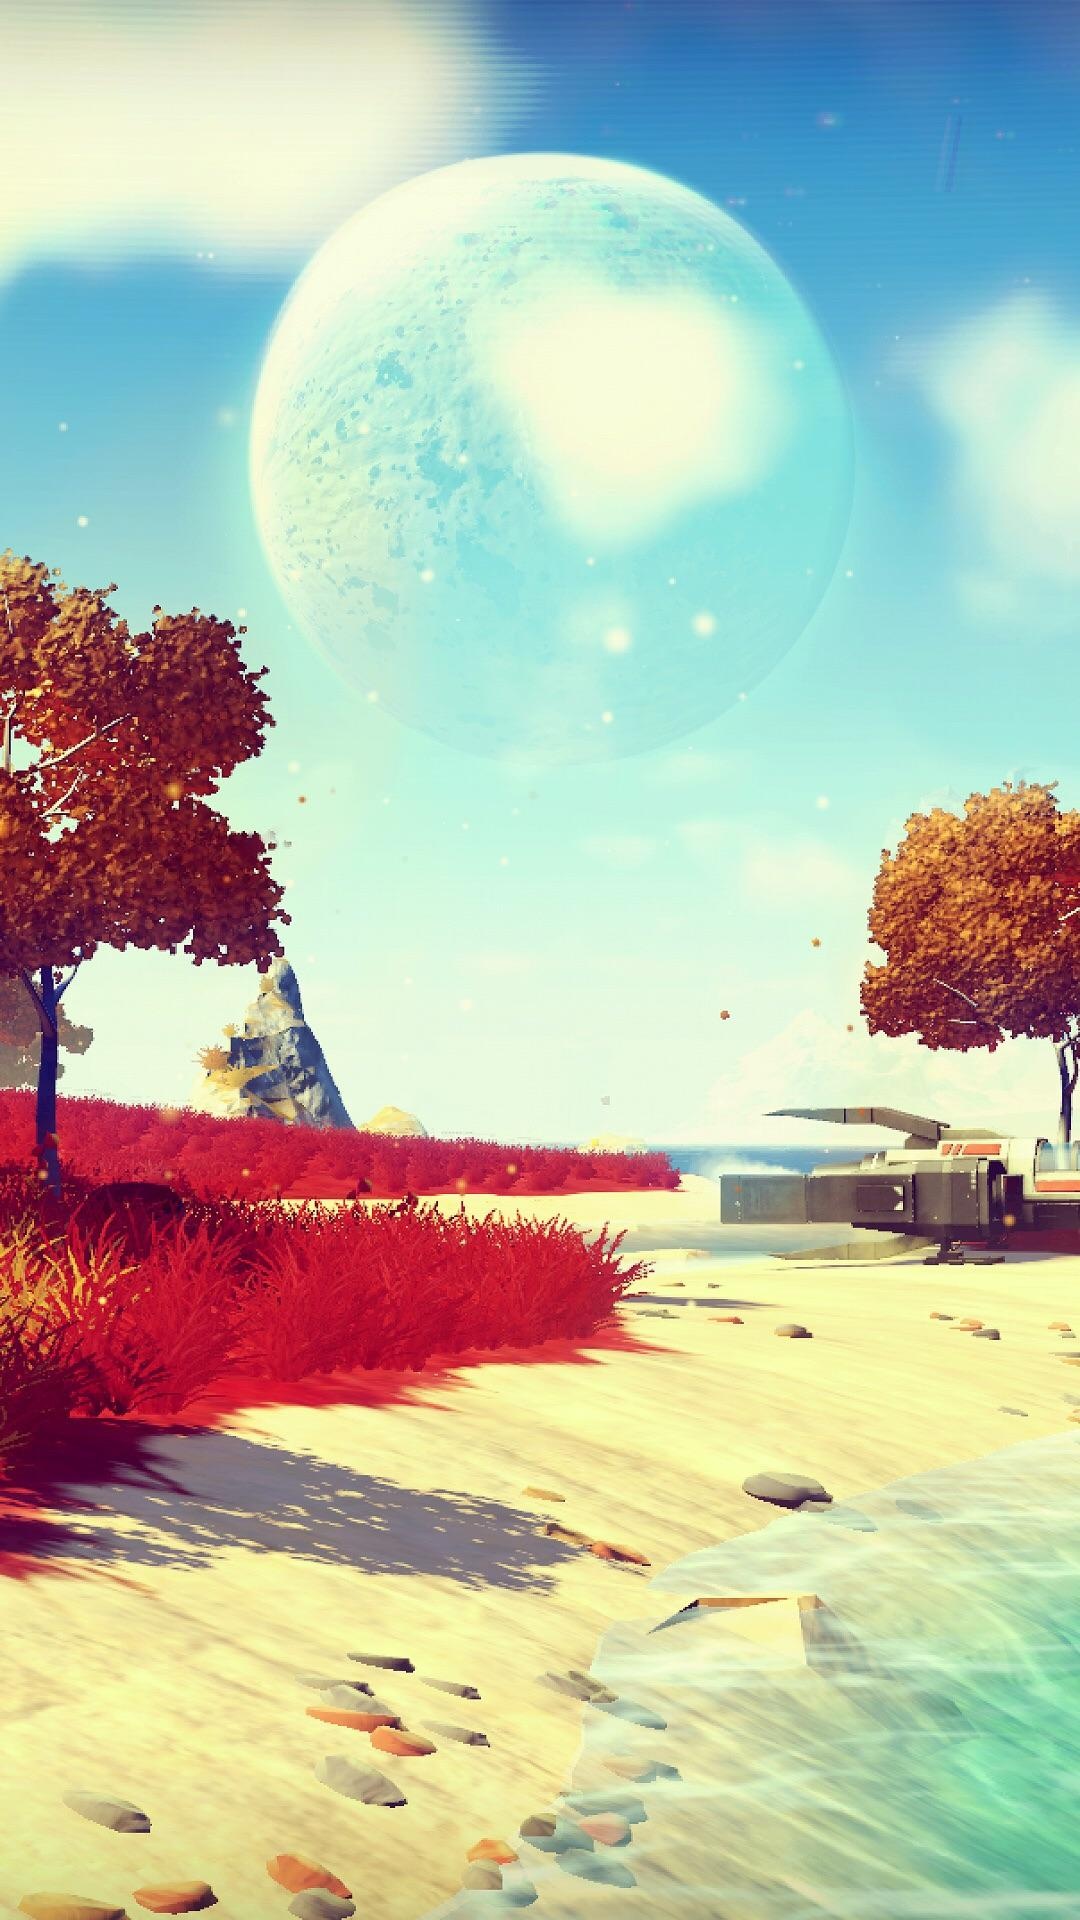 Phone wallpapers for No Man's Sky, Stunning mobile backgrounds, HD gaming imagery, Captivating visuals, 1080x1920 Full HD Handy